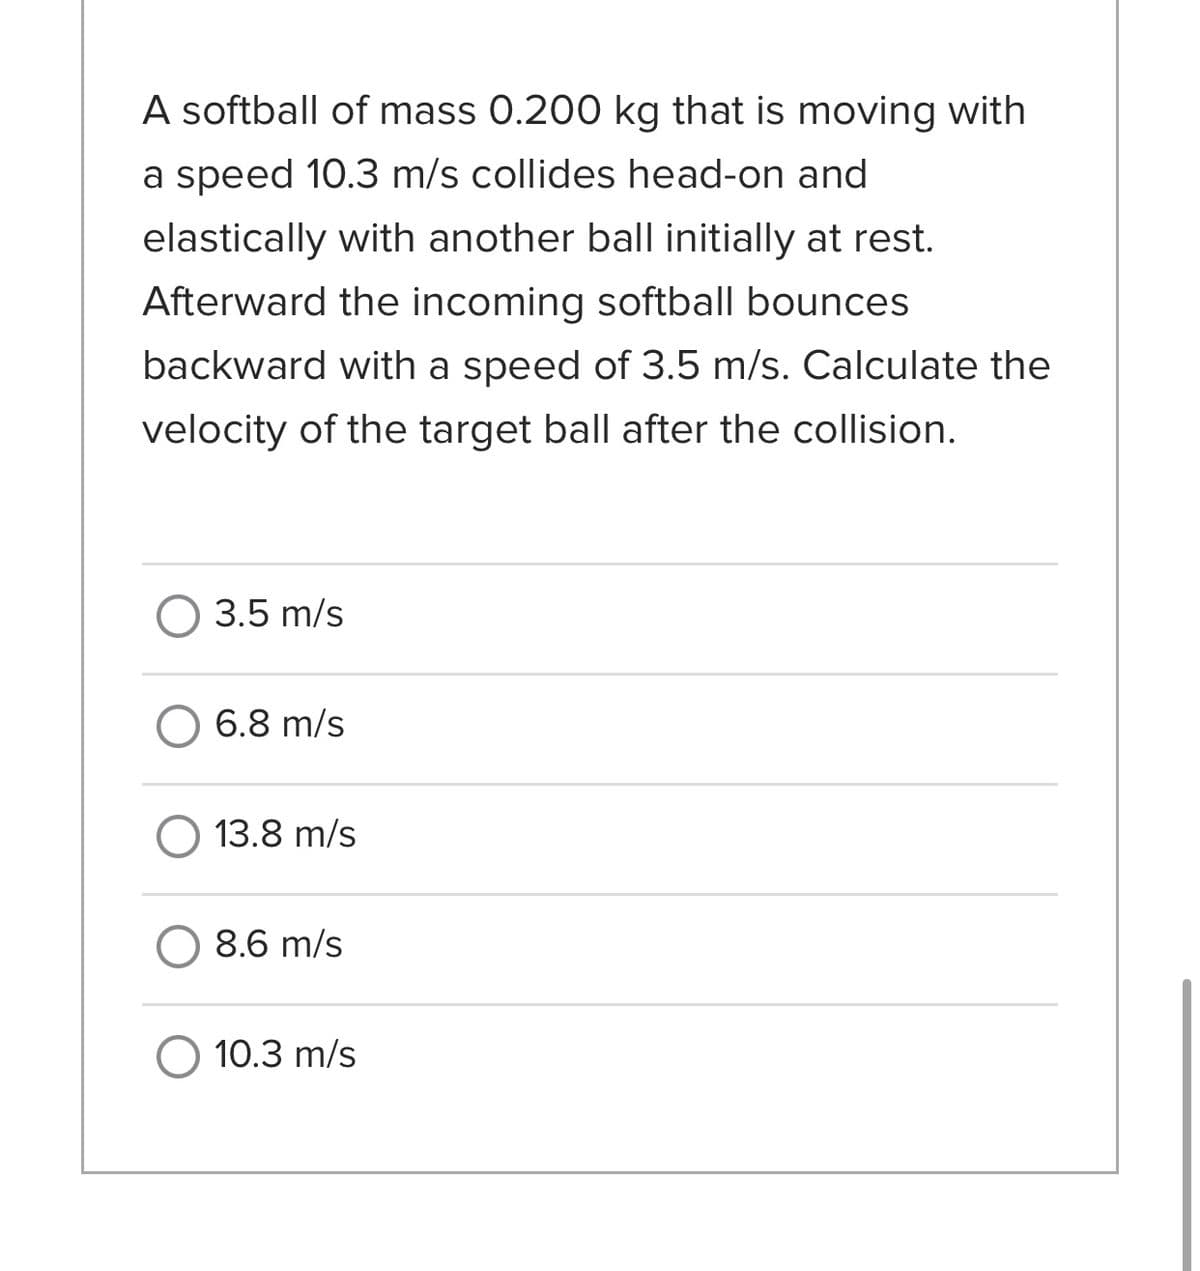 A softball of mass 0.200 kg that is moving with
a speed 10.3 m/s collides head-on and
elastically with another ball initially at rest.
Afterward the incoming softball bounces
backward with a speed of 3.5 m/s. Calculate the
velocity of the target ball after the collision.
3.5 m/s
O 6.8 m/s
O 13.8 m/s
8.6 m/s
O 10.3 m/s
